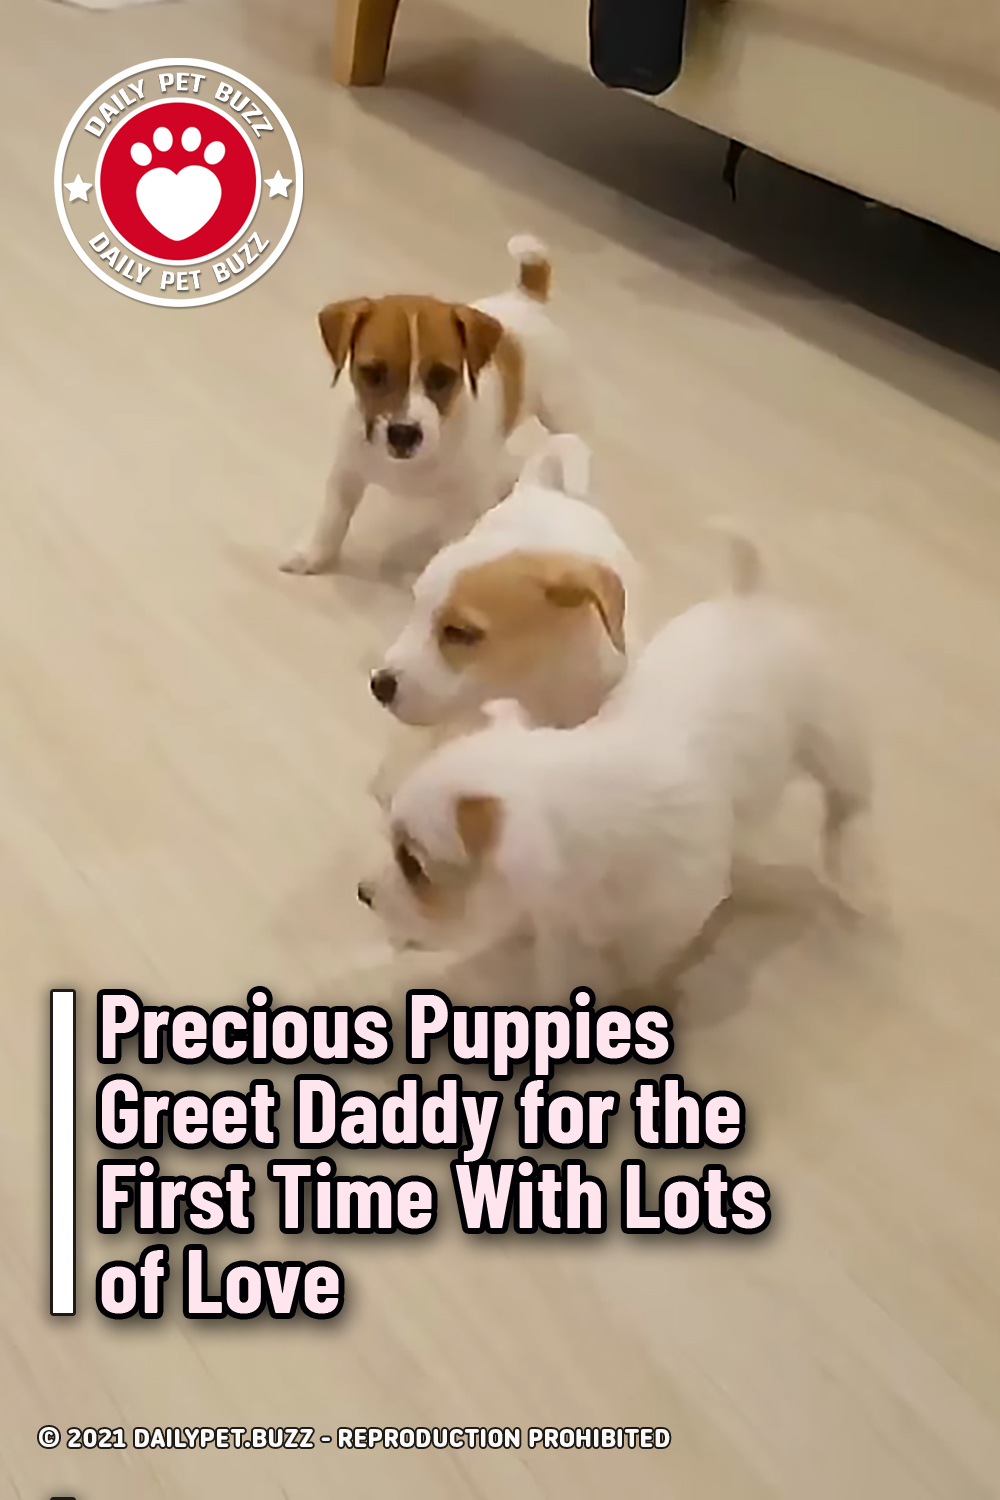 Precious Puppies Greet Daddy for the First Time With Lots of Love